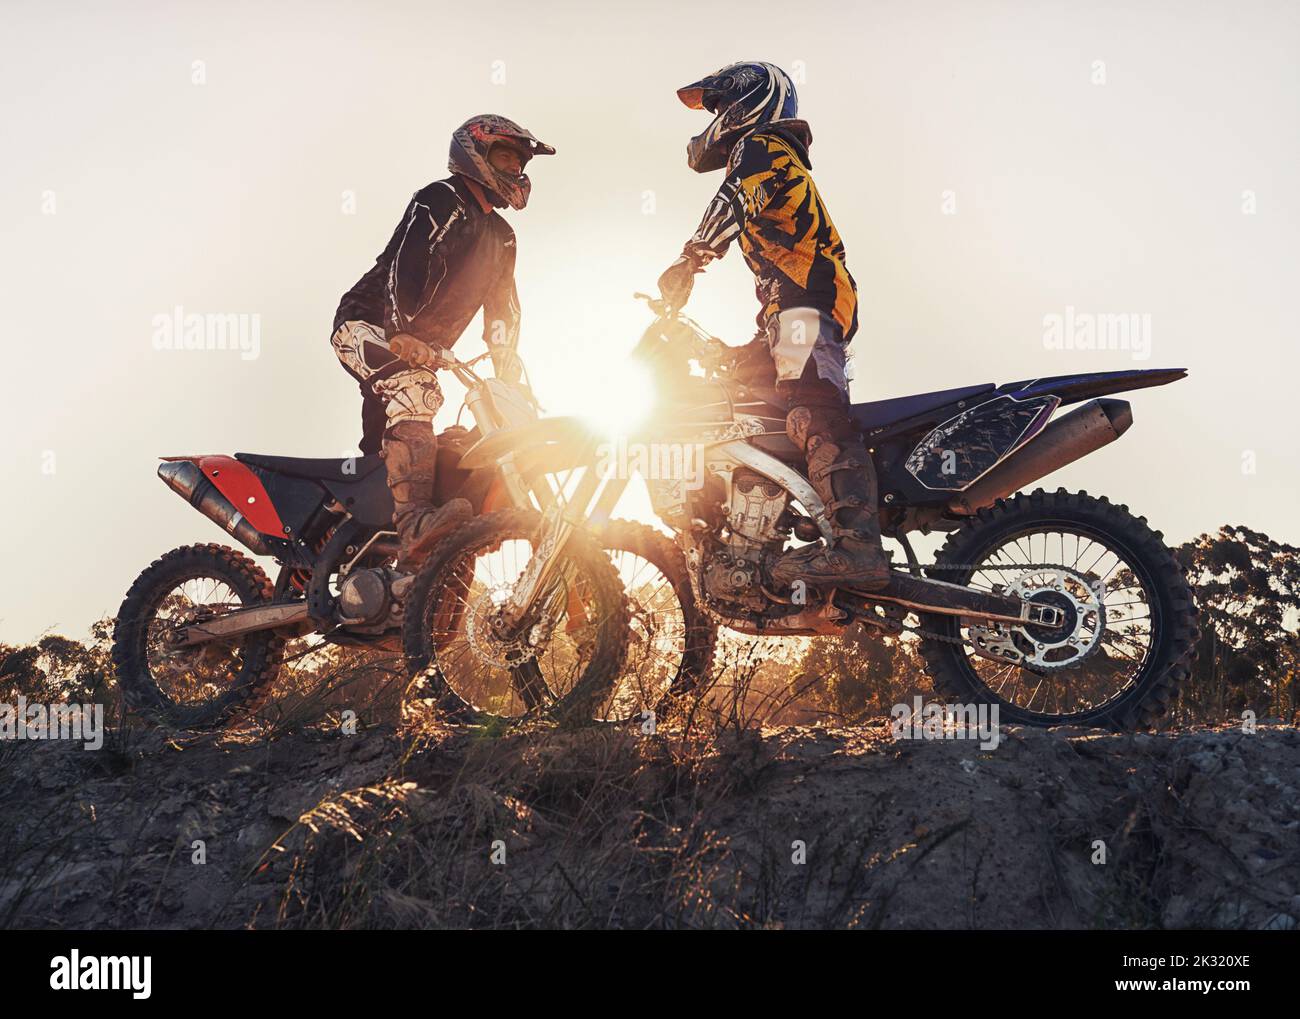 That was an awesome day on the track. two motocross riders out on the track against the setting sun. Stock Photo